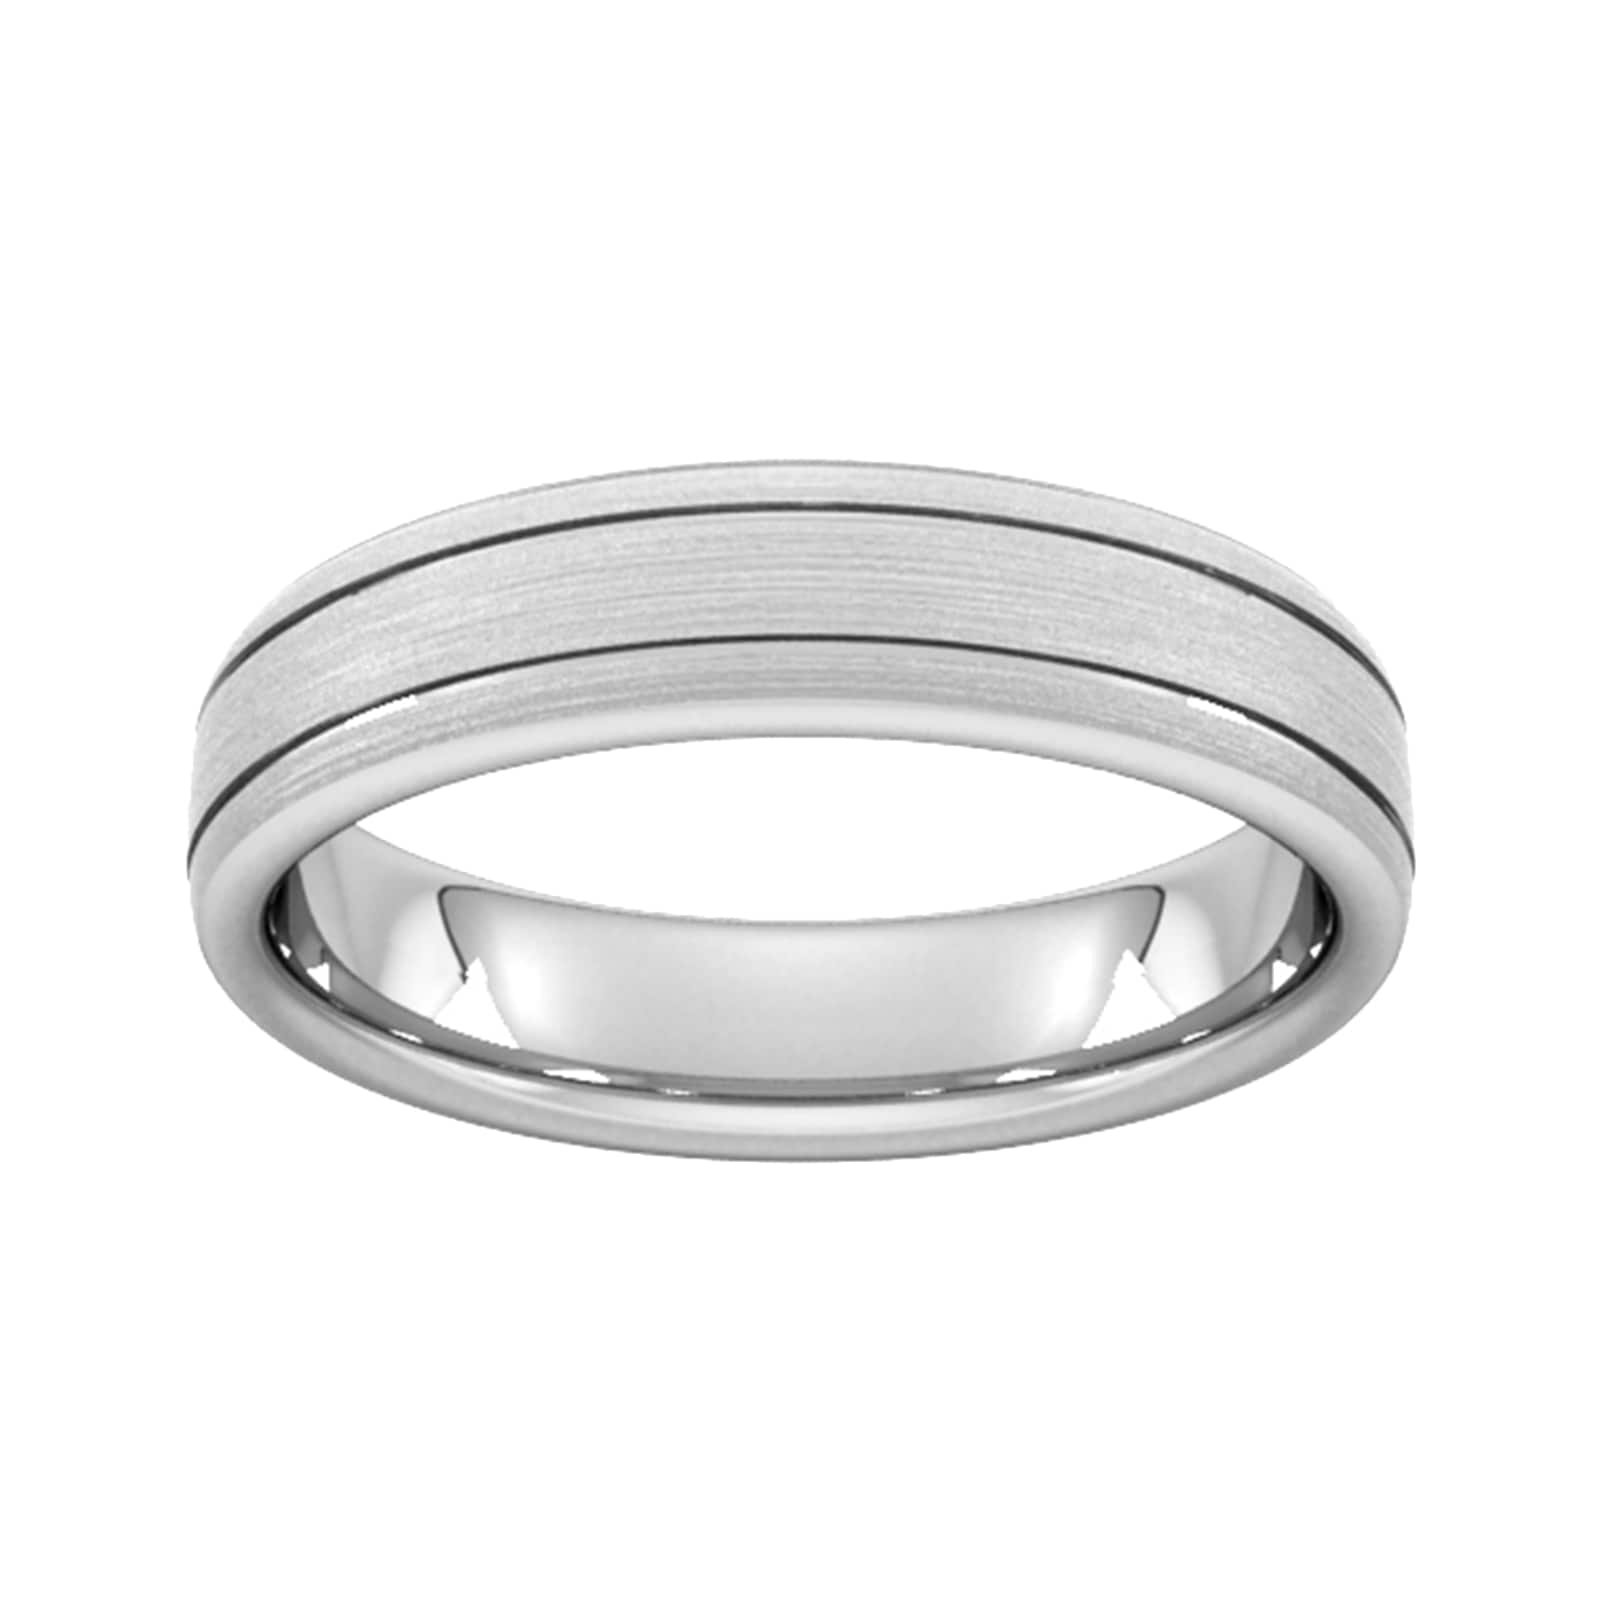 5mm D Shape Standard Matt Finish With Double Grooves Wedding Ring In 950 Palladium - Ring Size I